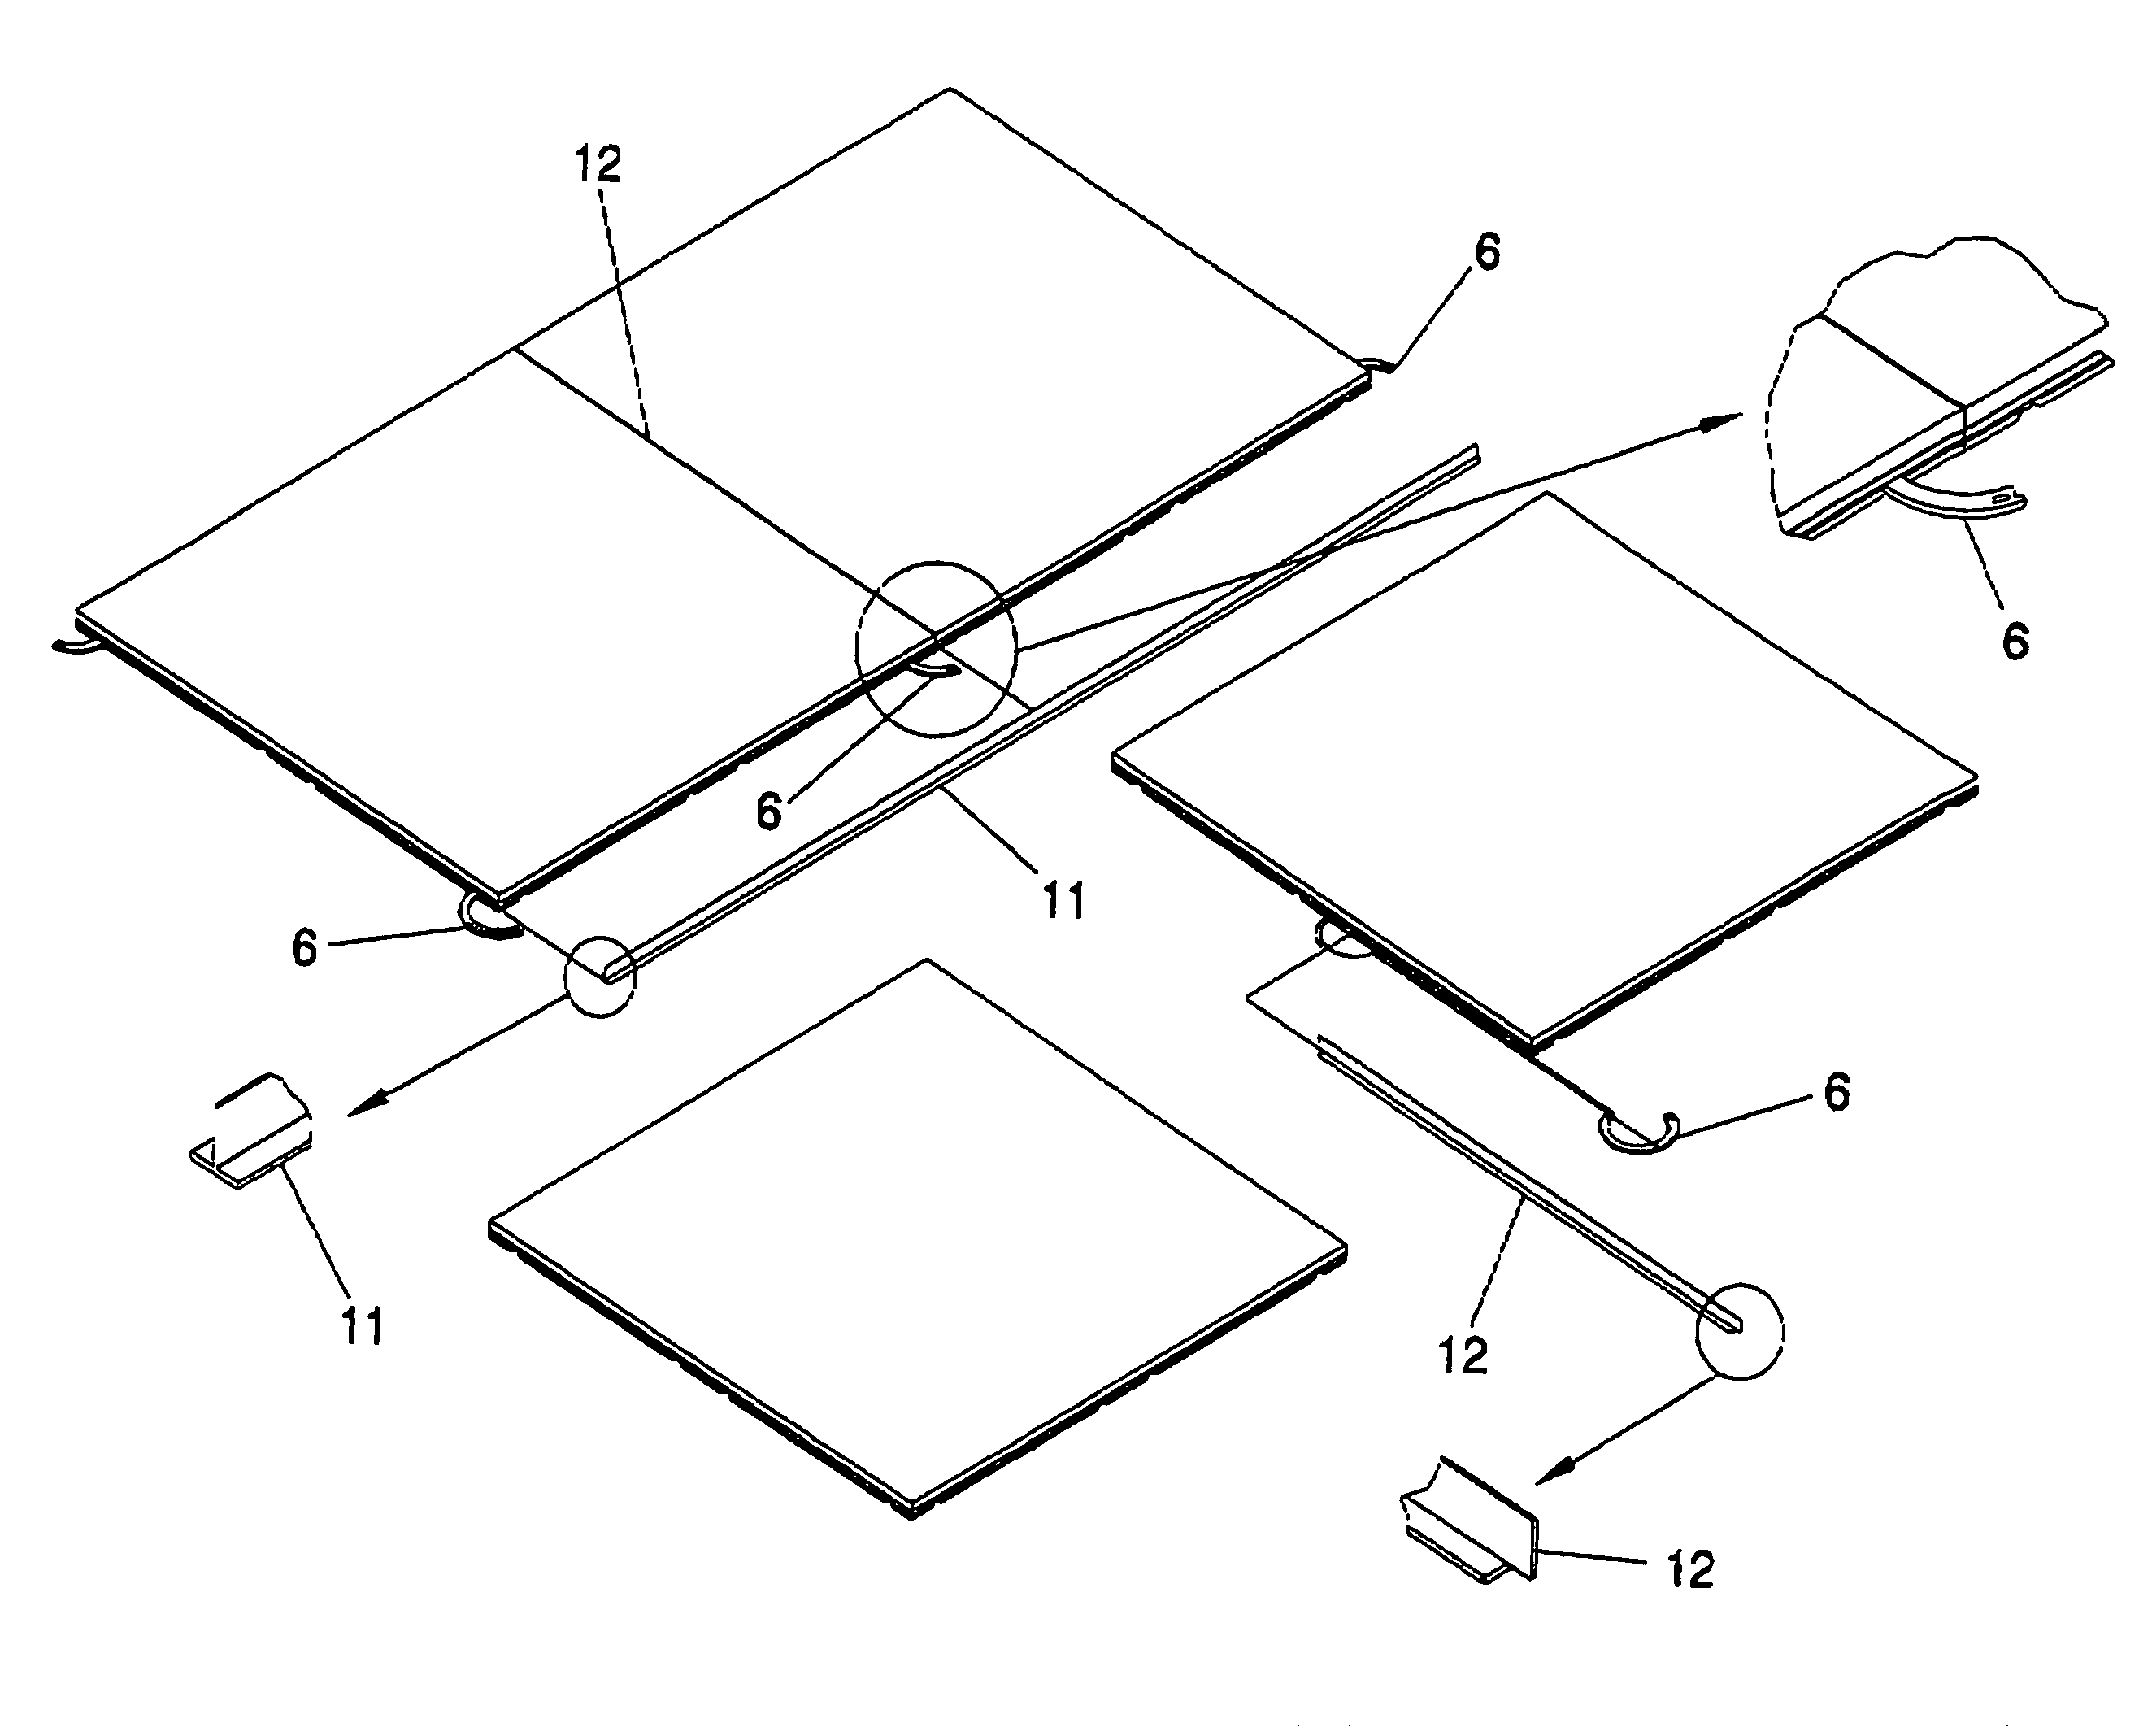 Assembly system for floor and/or wall tiles